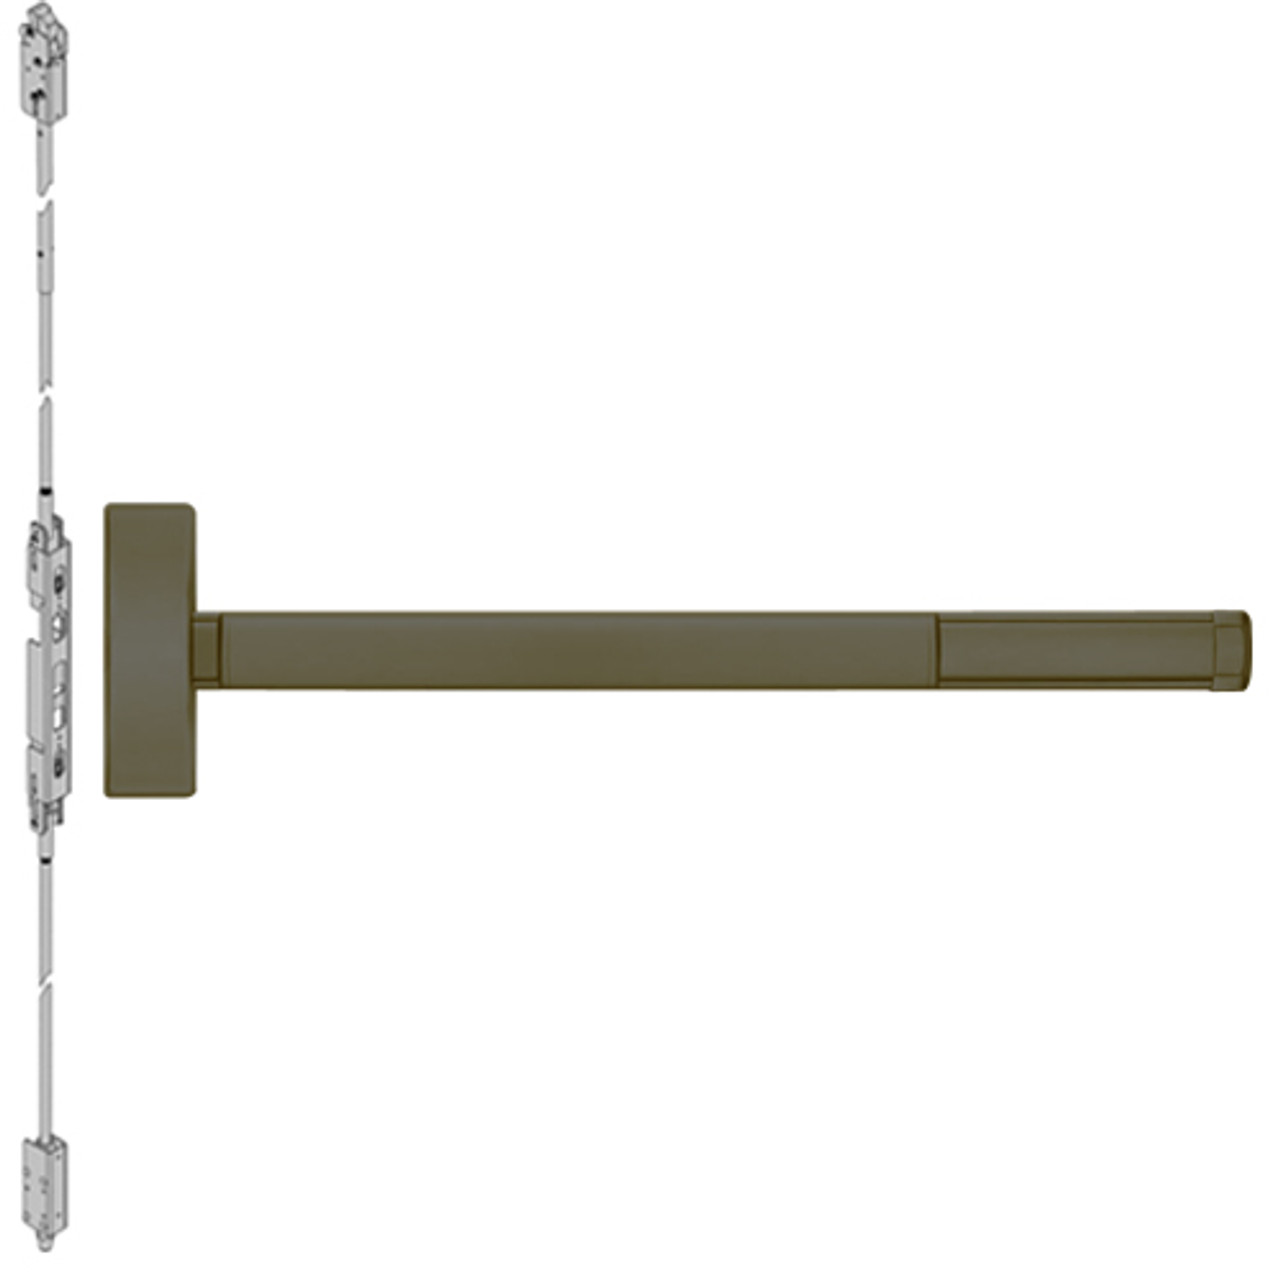 ELRFL2803-613-48 PHI 2800 Series Fire Rated Concealed Vertical Rod Exit Device with Electric Latch Retraction Prepped for Key Retracts Latchbolt in Oil Rubbed Bronze Finish